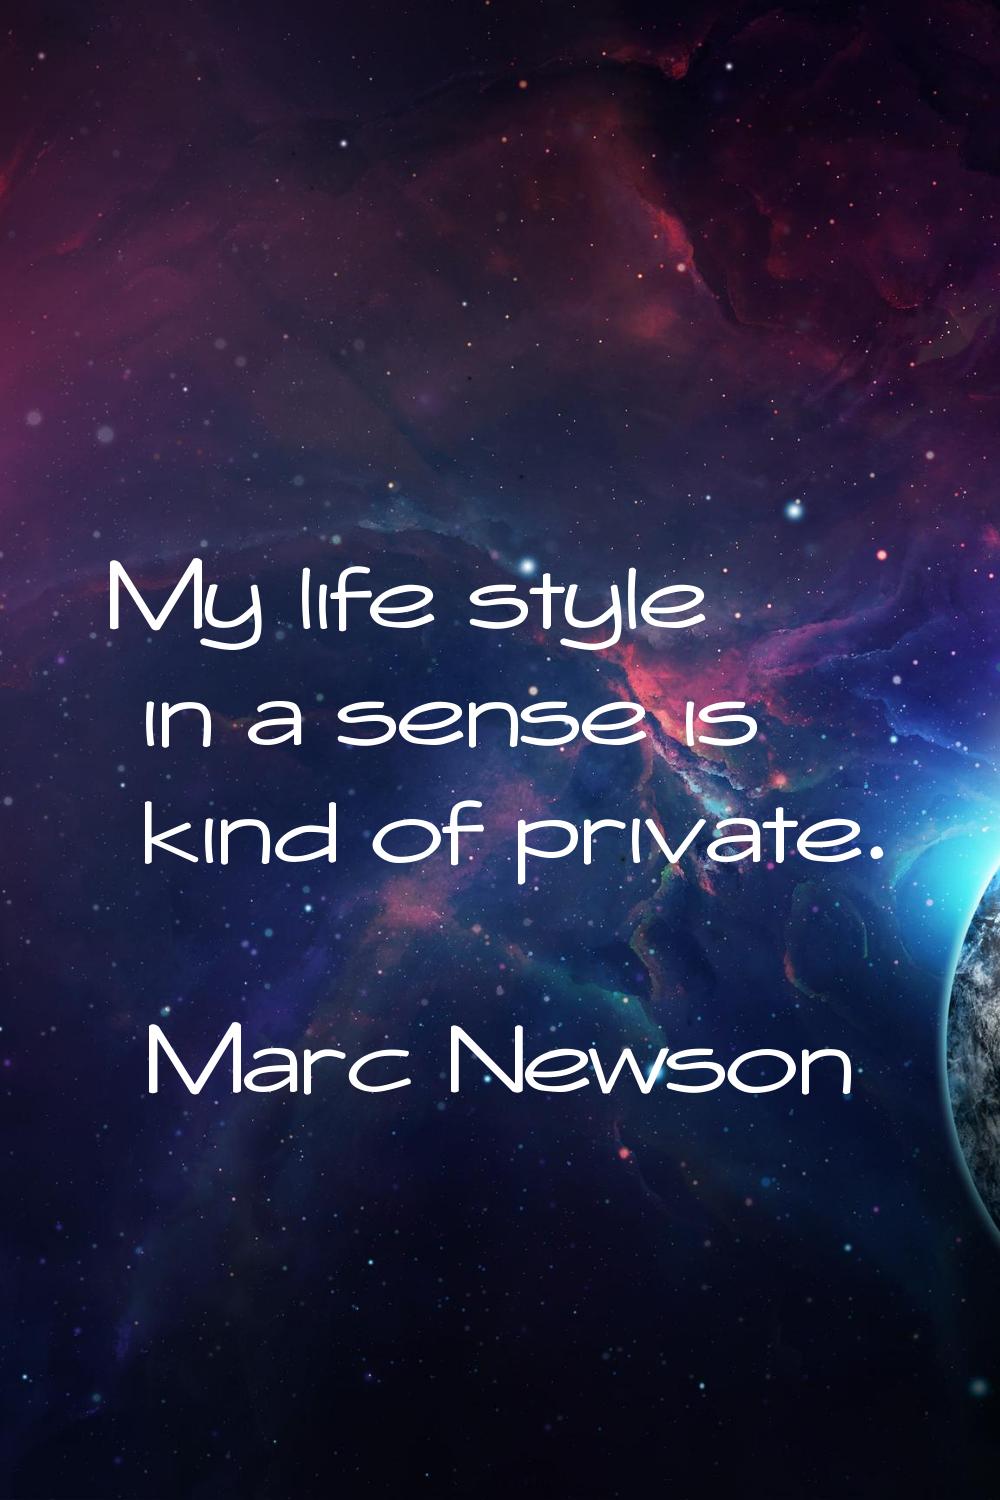 My life style in a sense is kind of private.